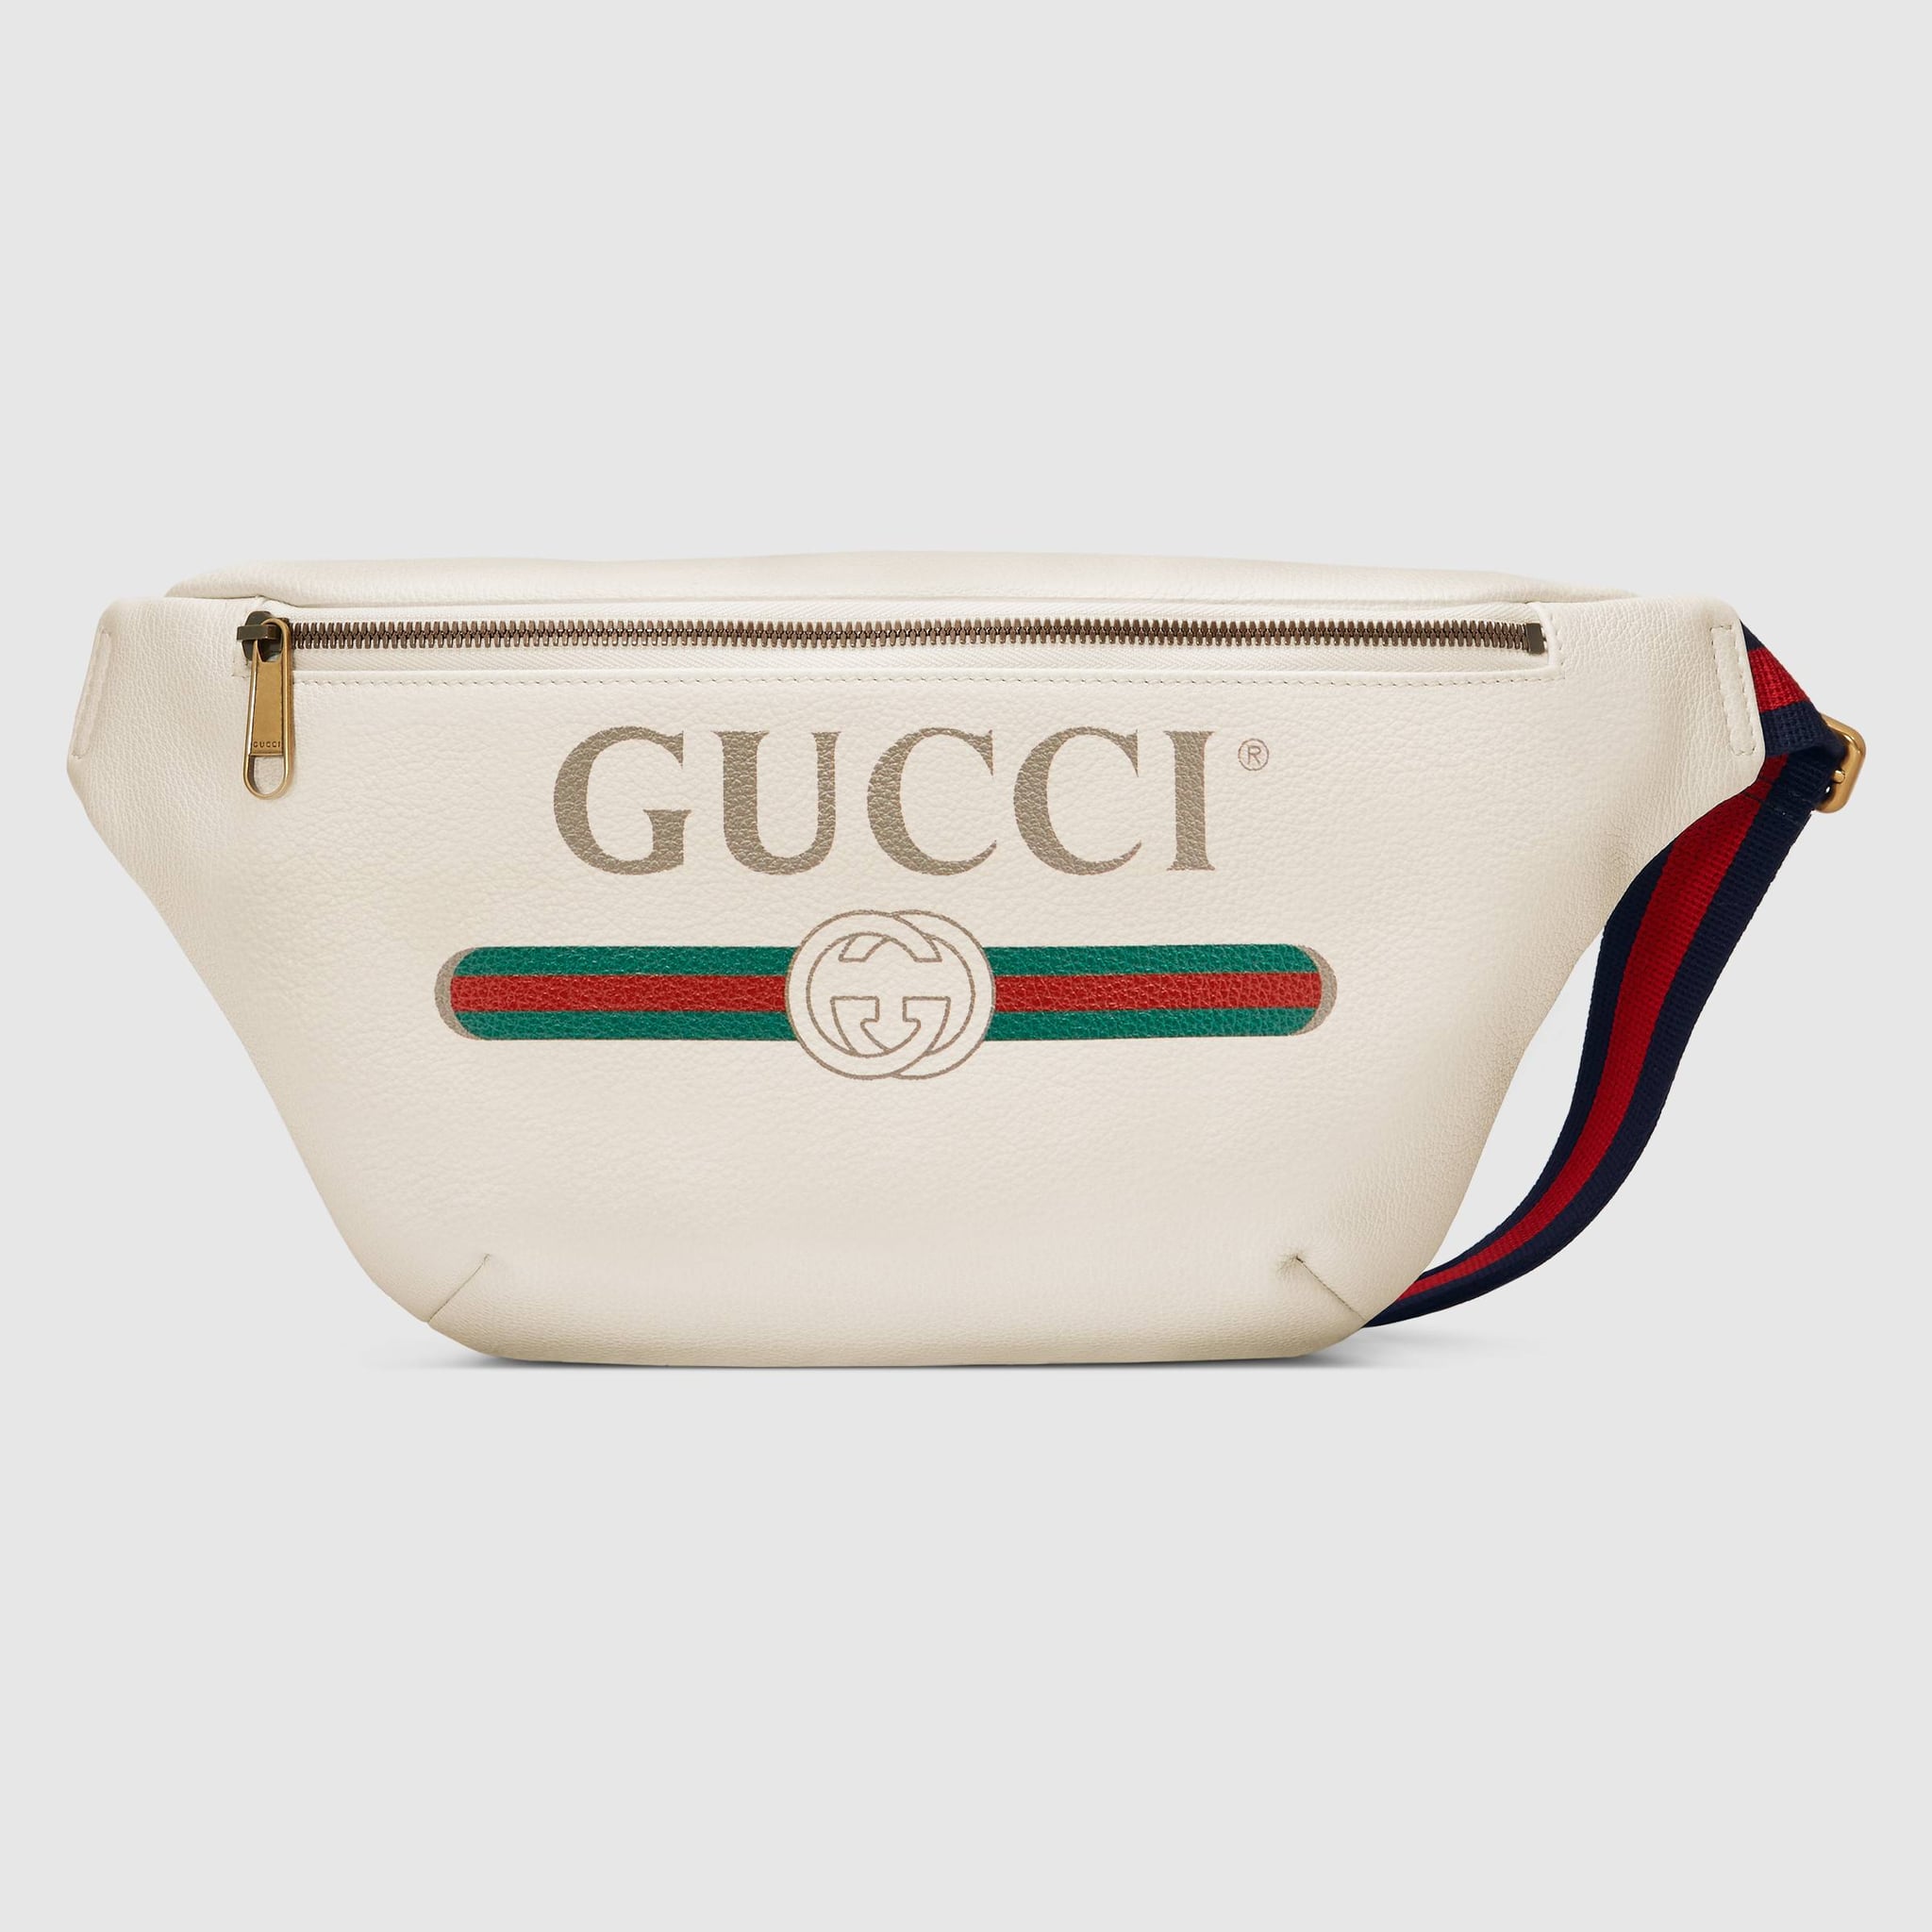 gucci fanny pack with writing